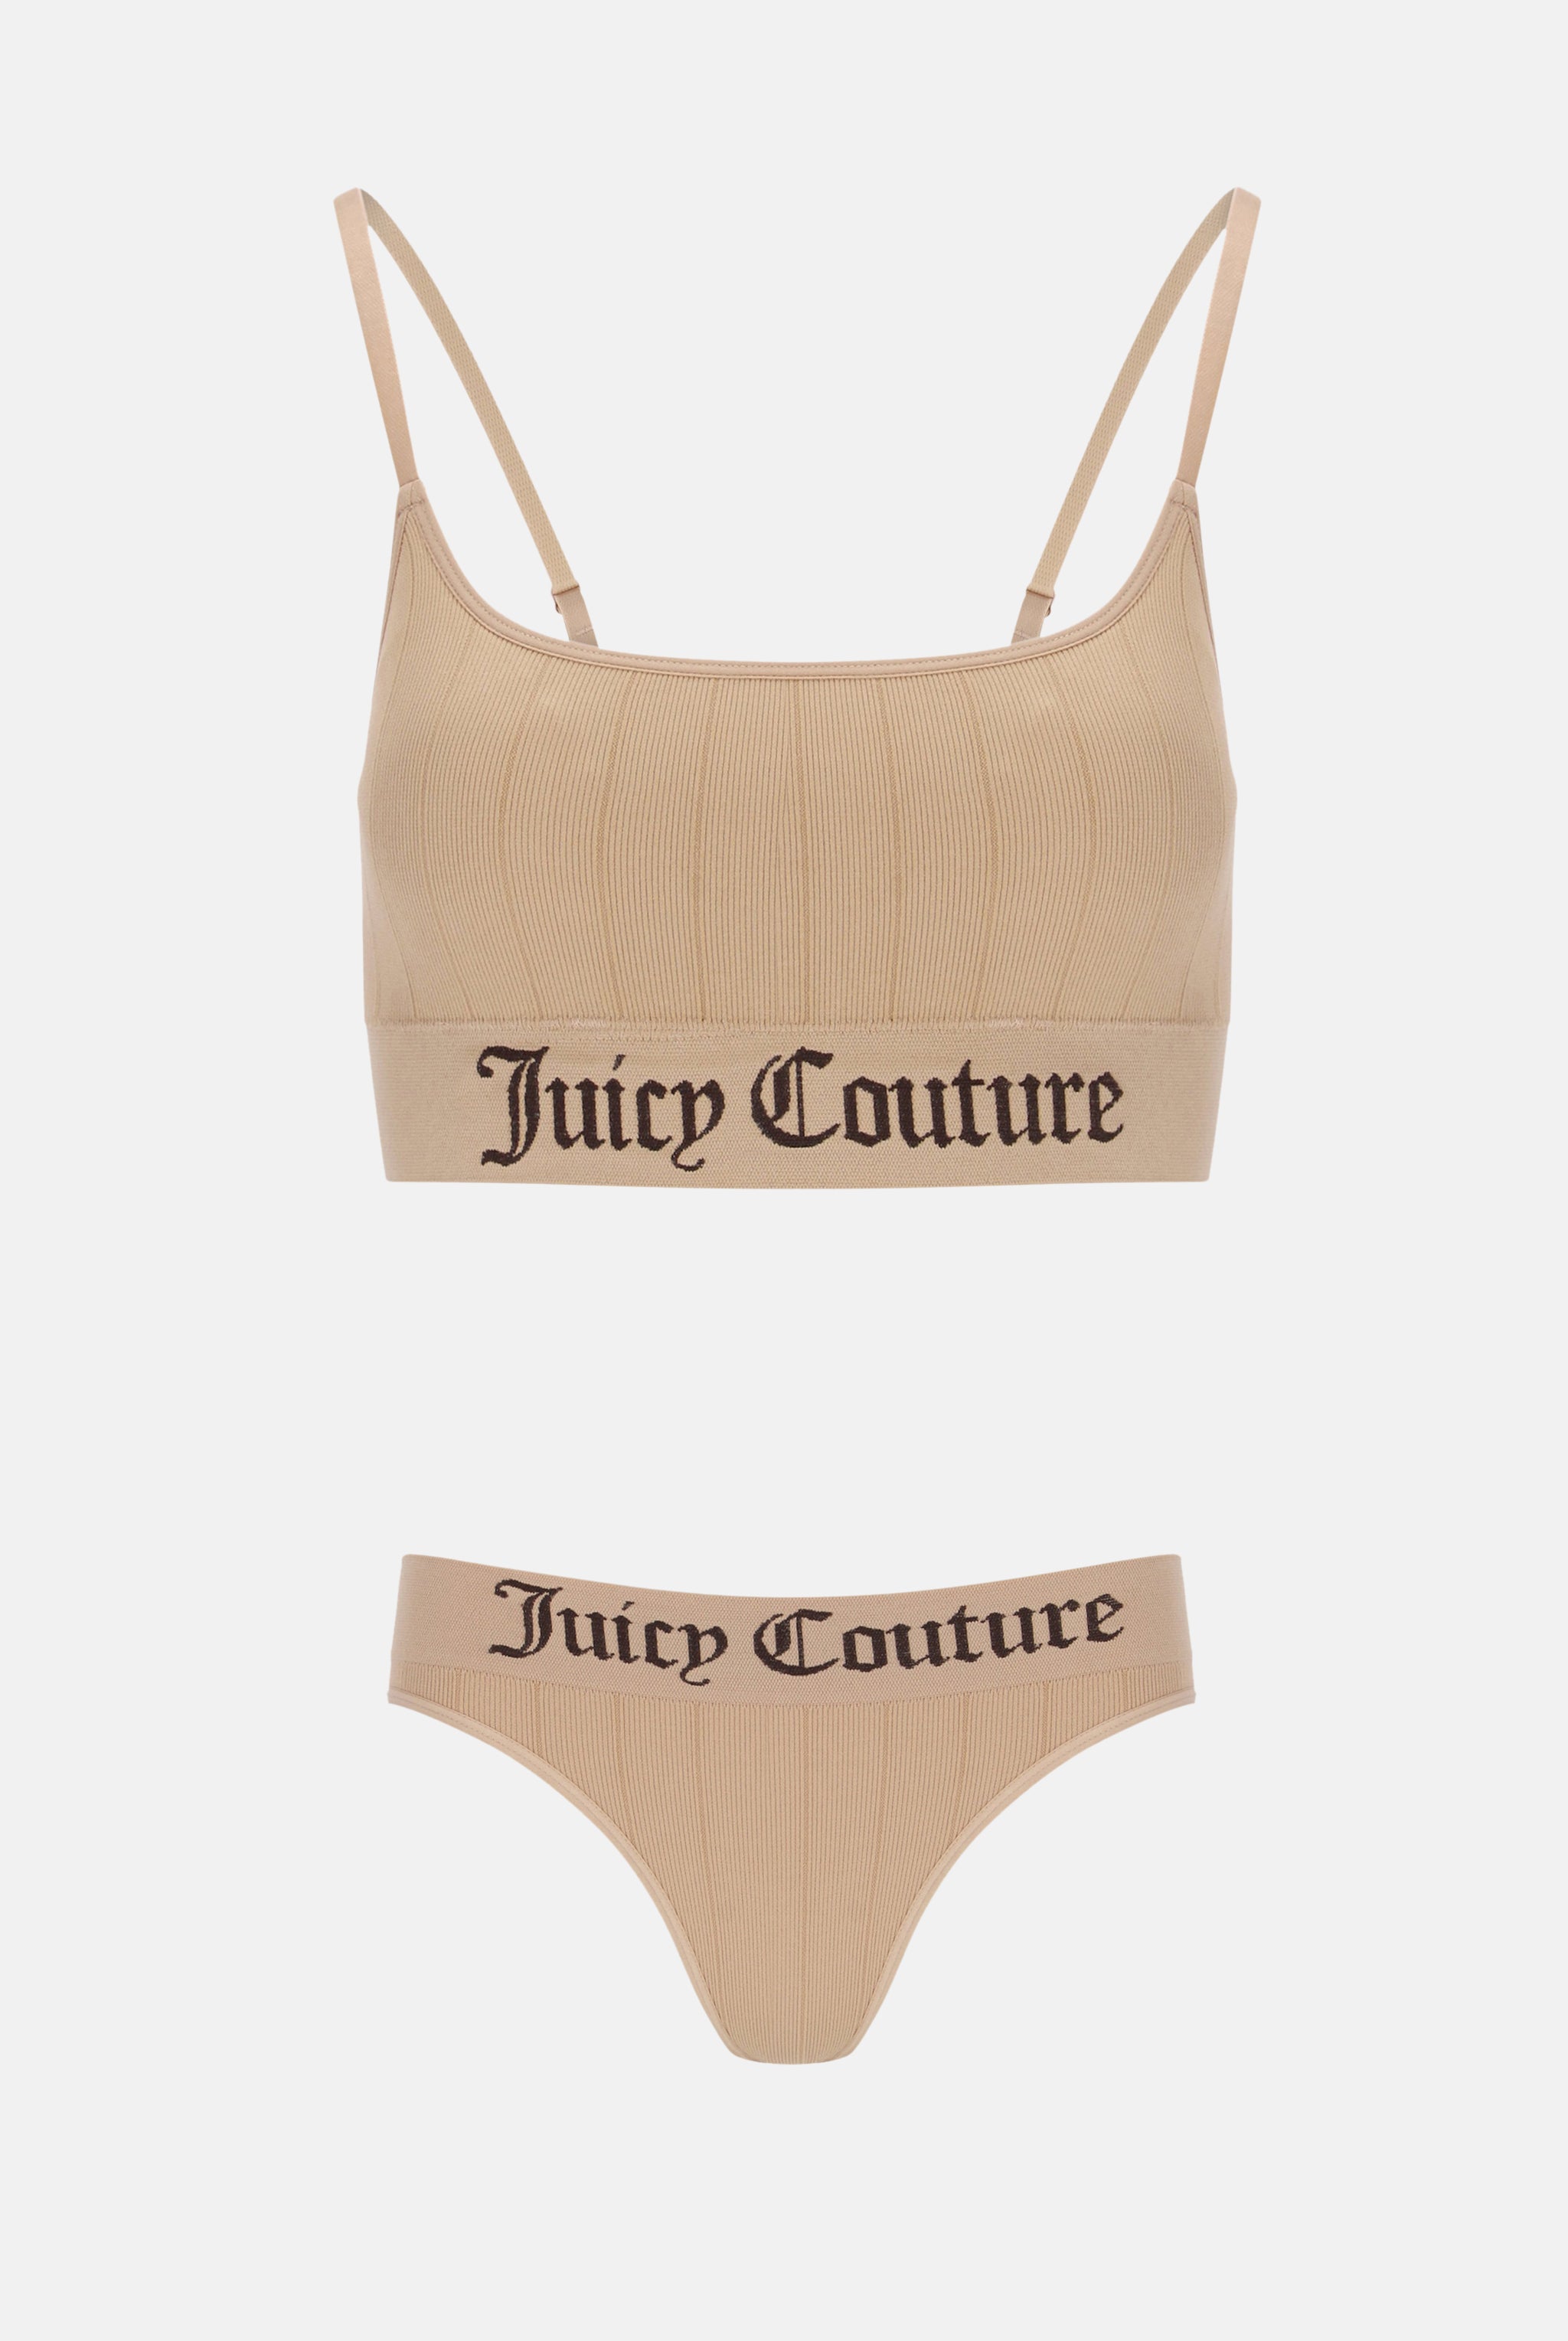 Juicy Couture, Intimates & Sleepwear, Shaping Thong Juicy Couture Beige  Size Xl